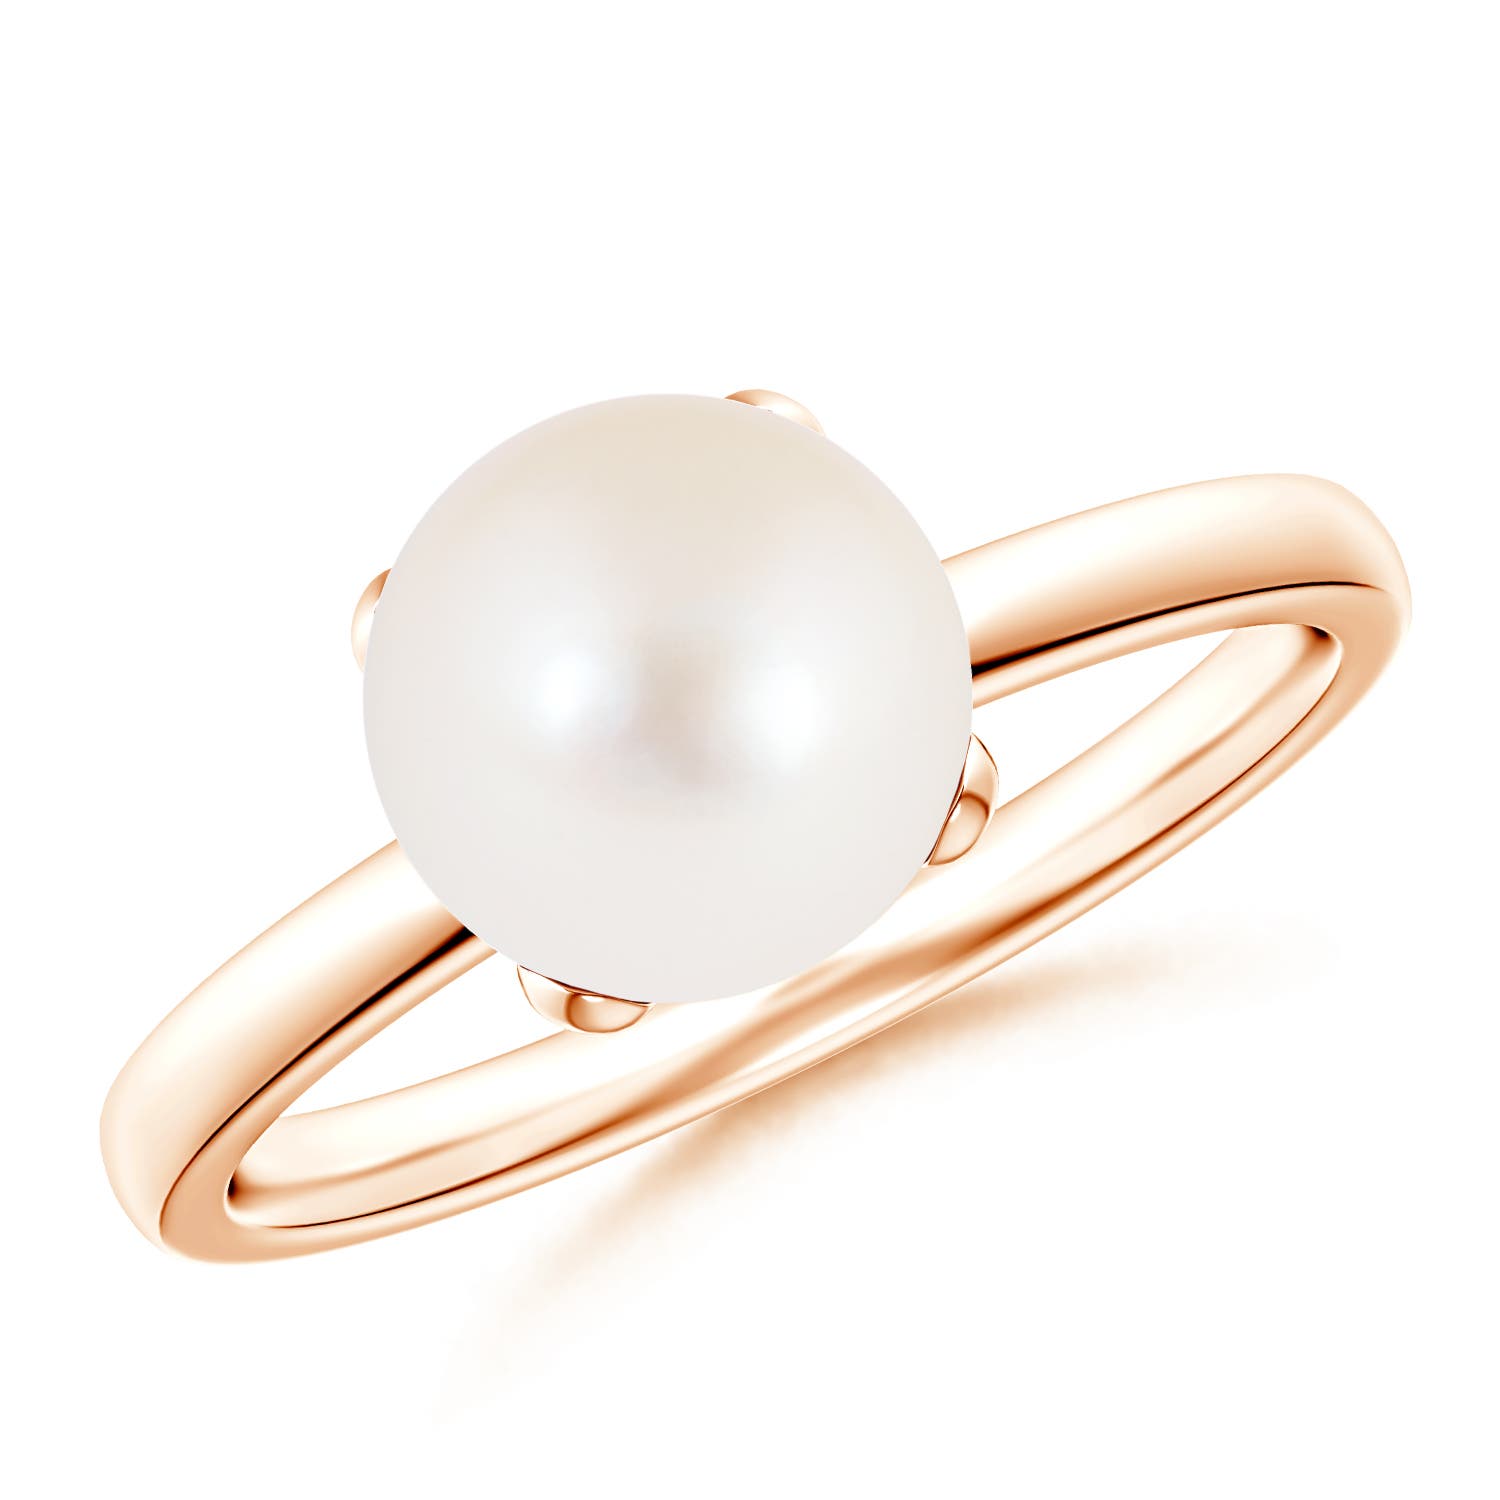 AAA / 3.7 CT / 14 KT Rose Gold